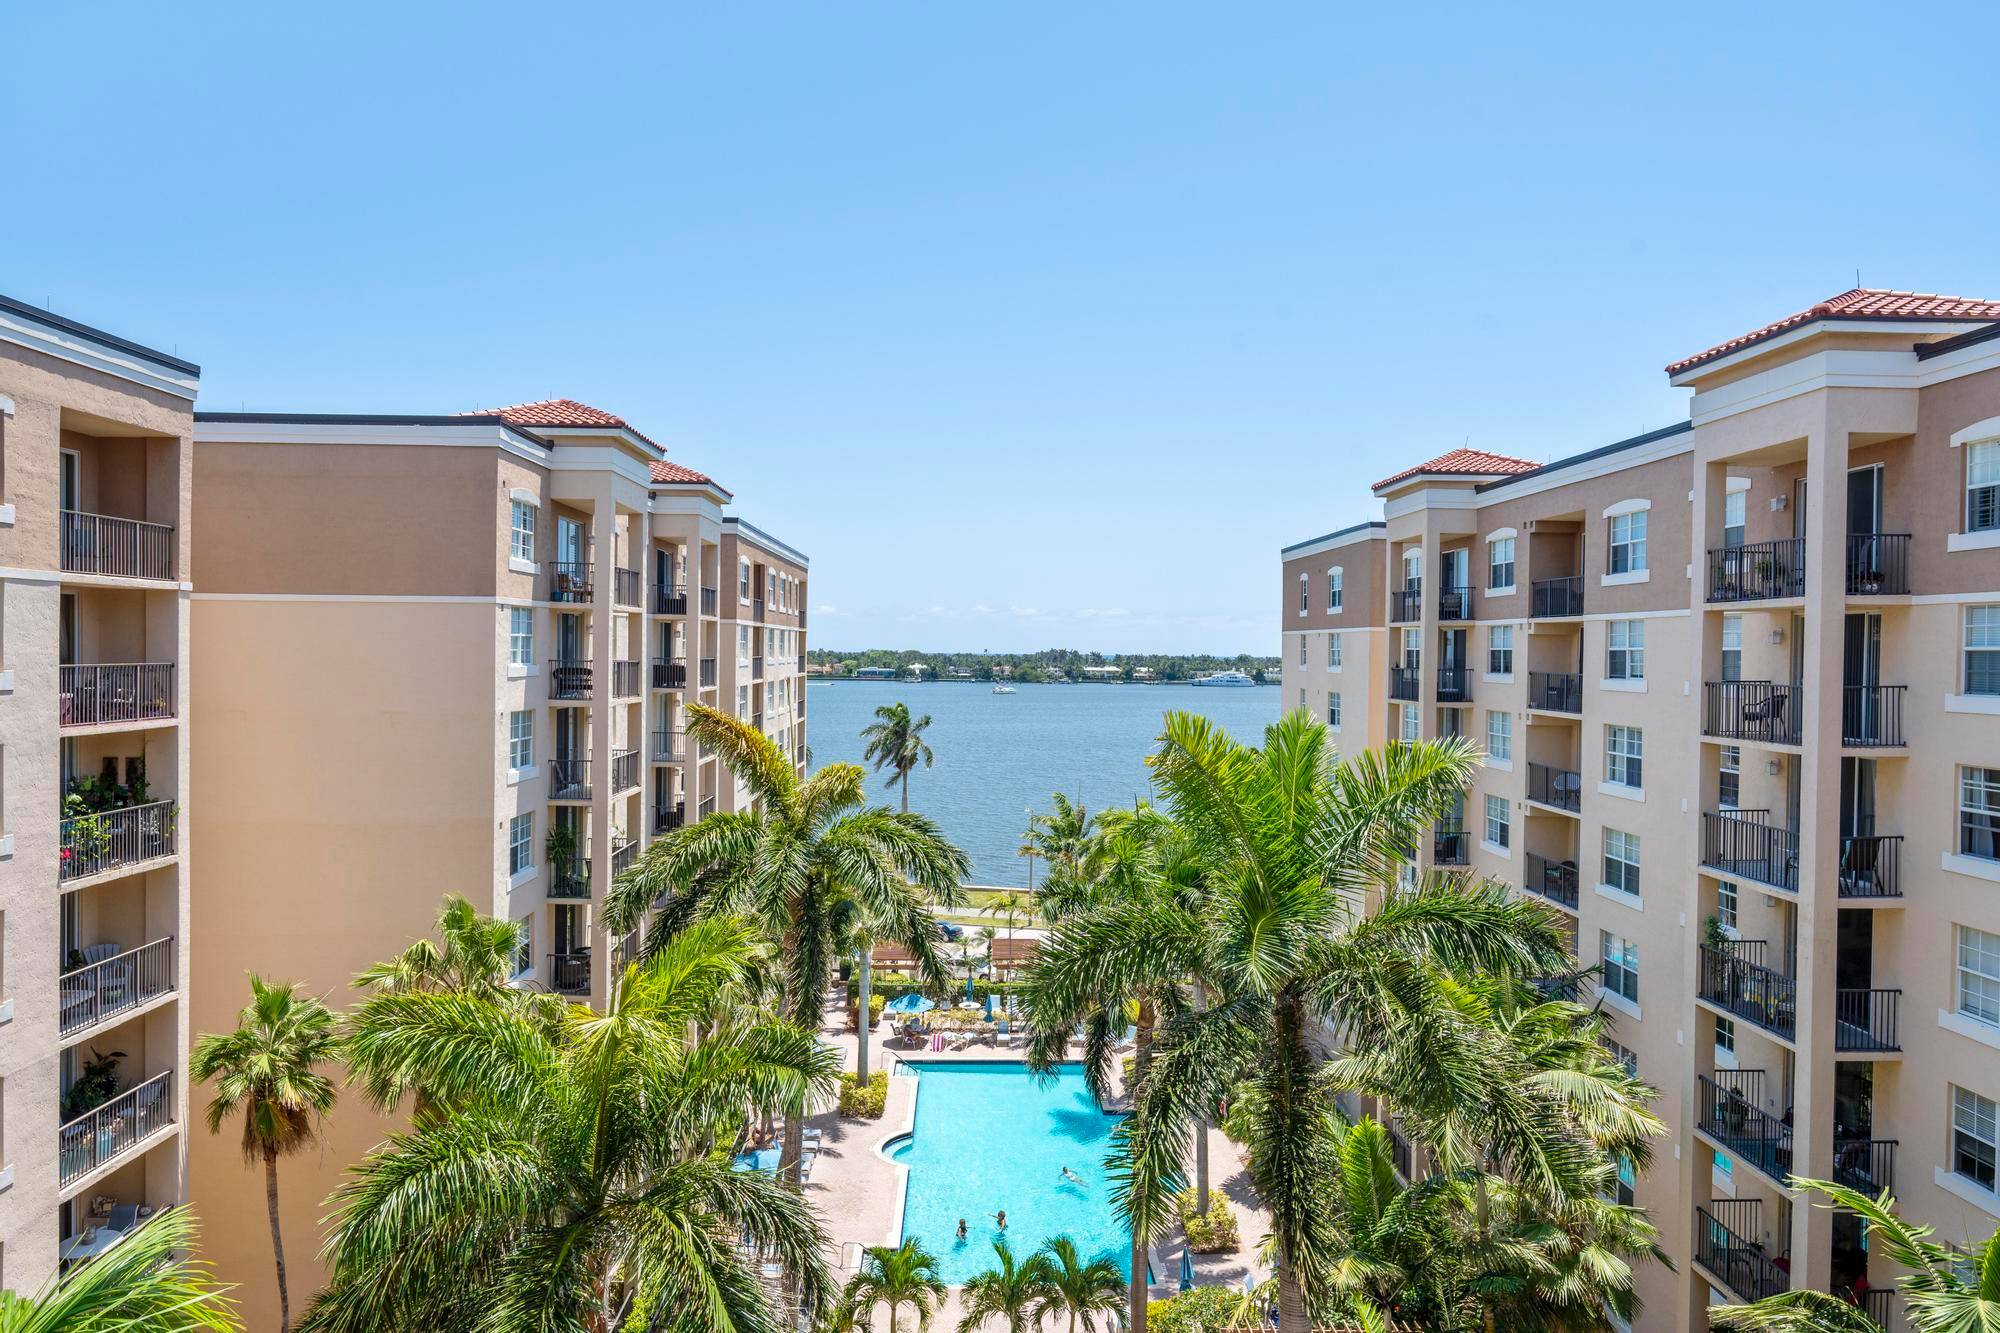 Waterfront condo in prime location with breathtaking ocean and intracoastal views from every room, this exquisite condo offers a blend of luxury and comfort spread over 1, 070 square feet ...